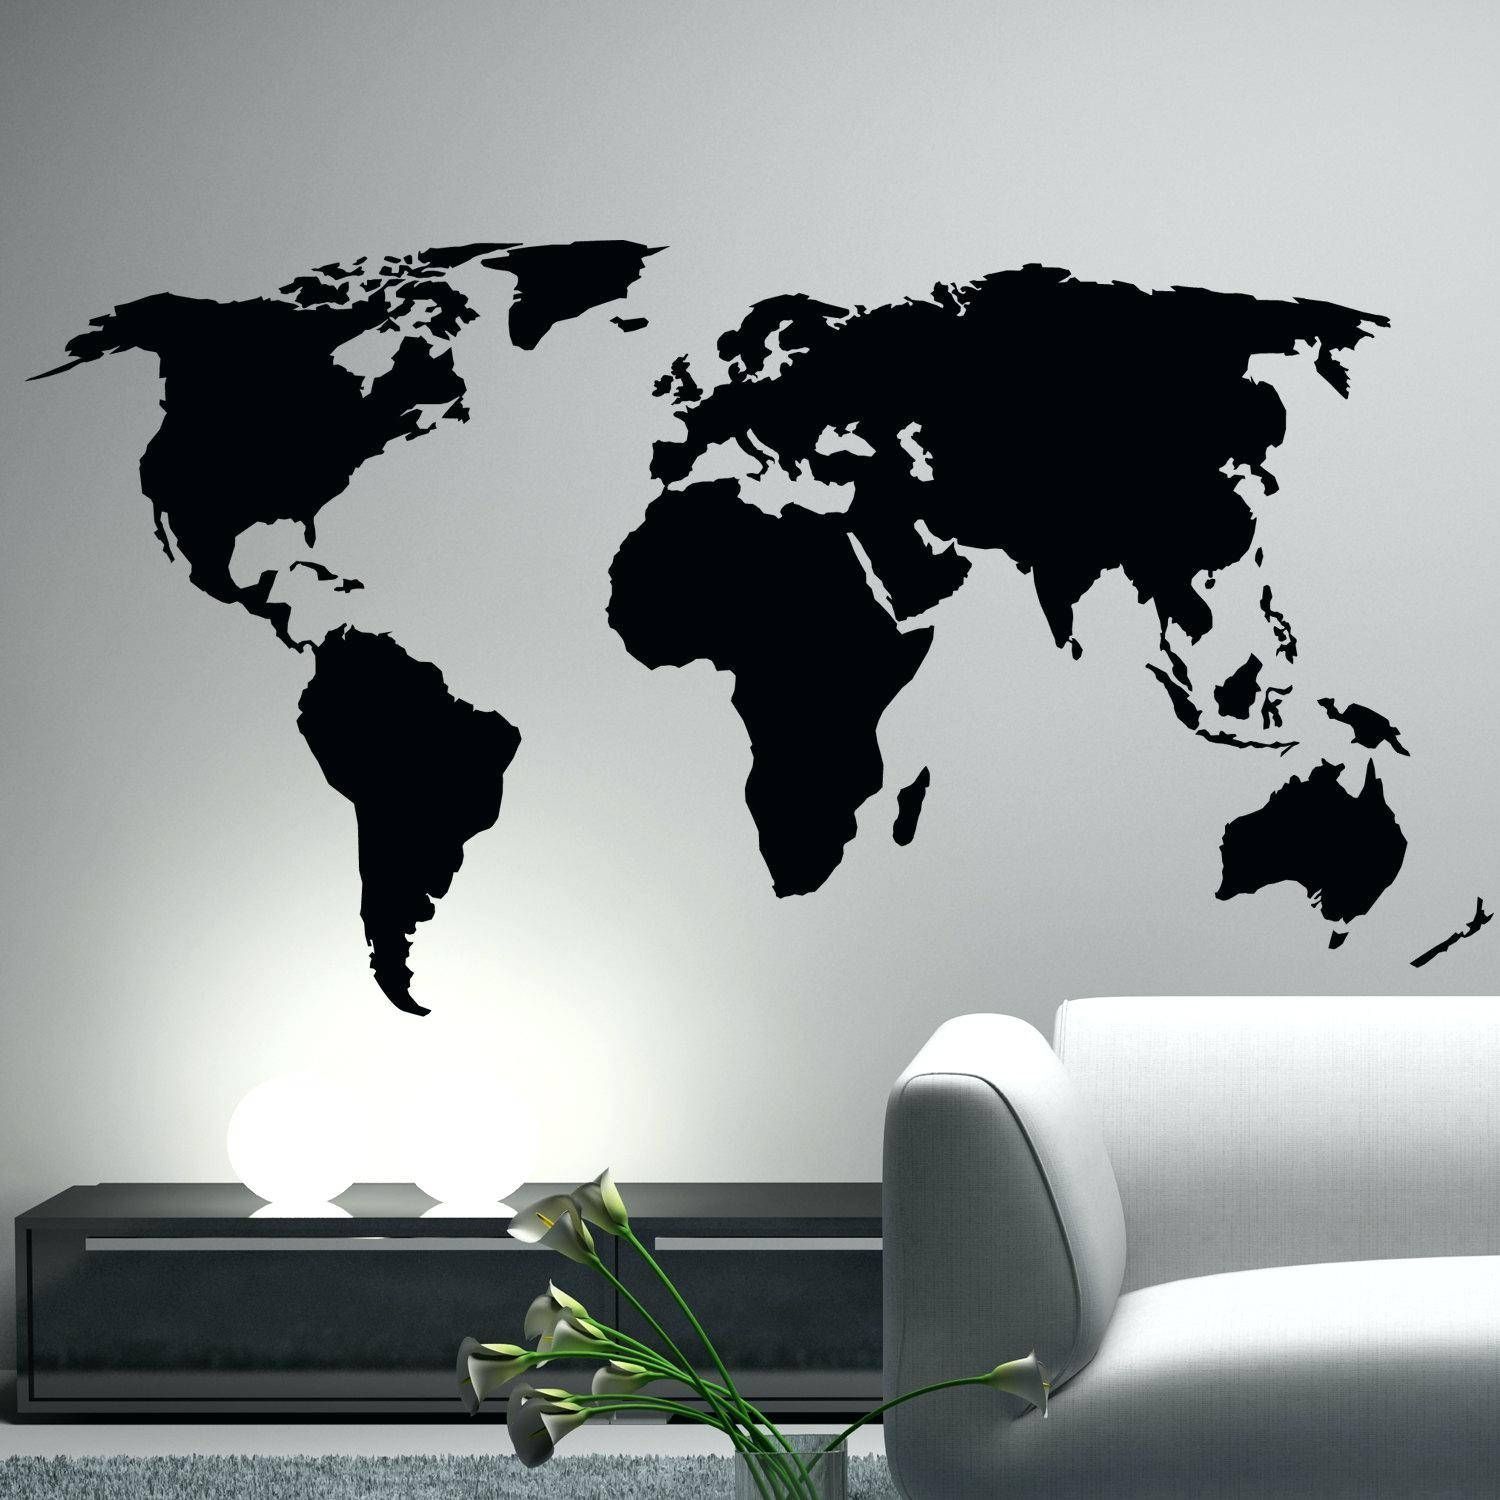 Wall Stickers Wall Decals Office Decor World Map Wall Decal With Regard To Newest World Map Wall Art Stickers (View 18 of 20)